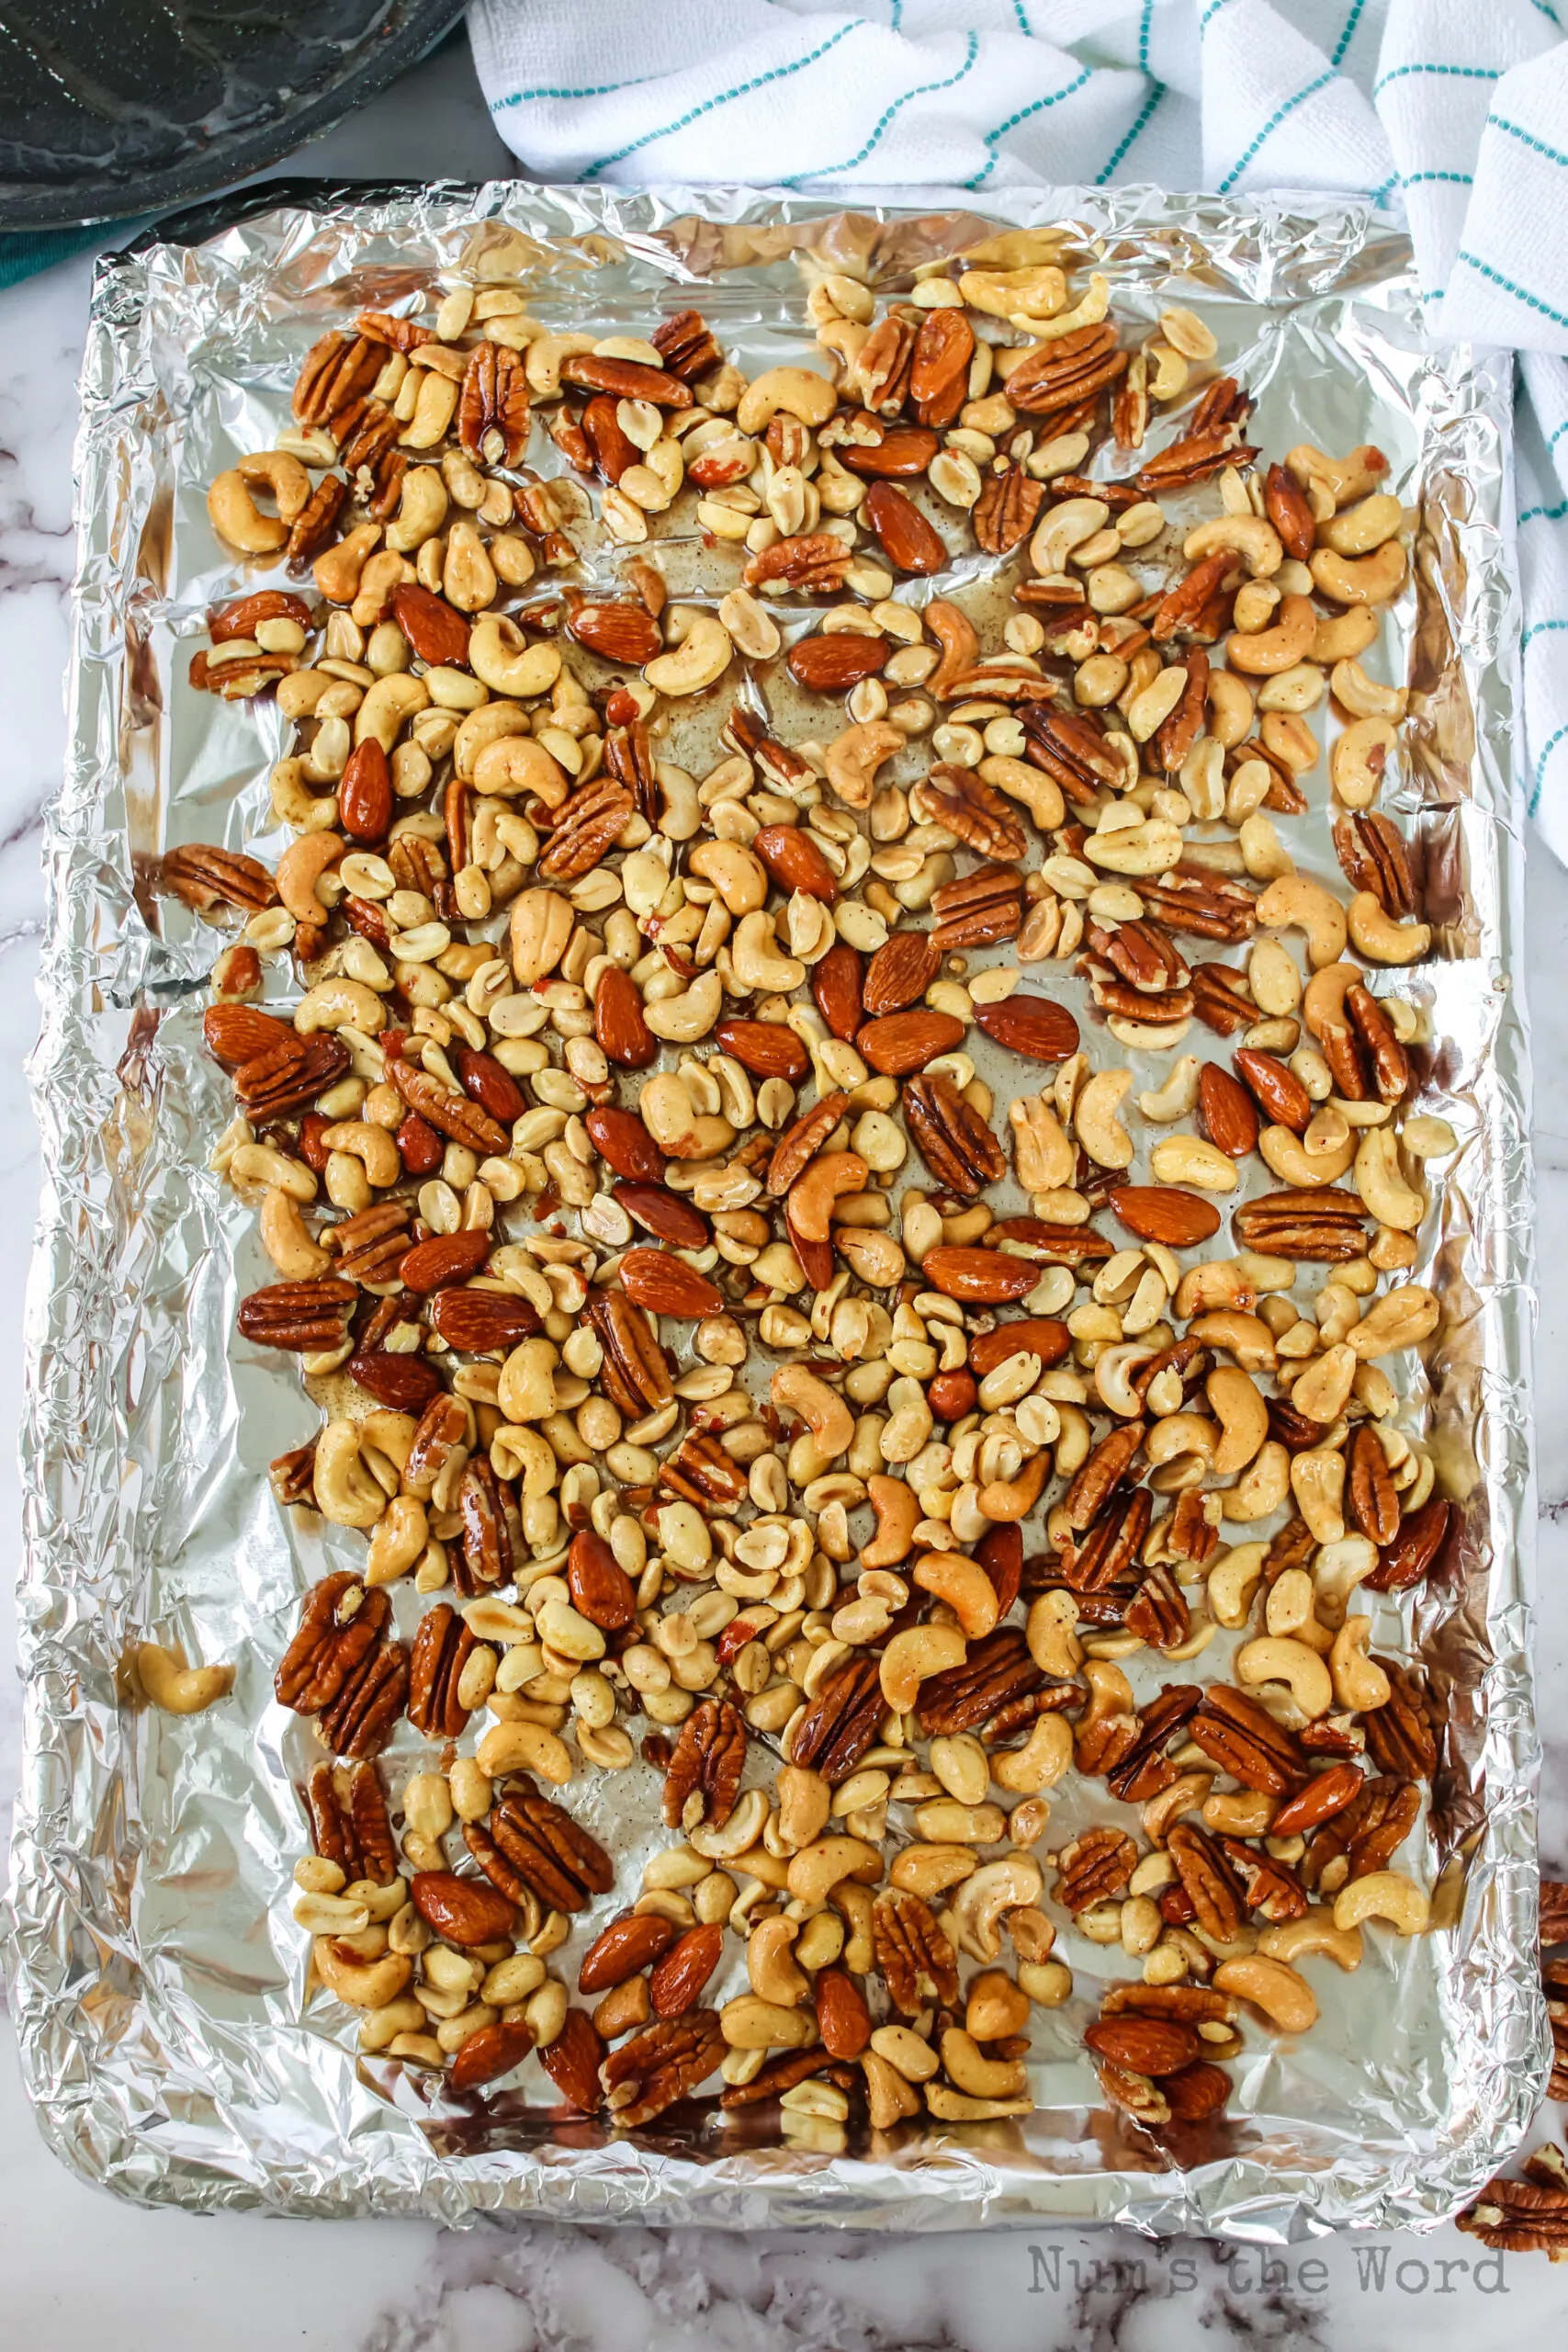 zoomed out image of coated mixed nuts on cookie sheet